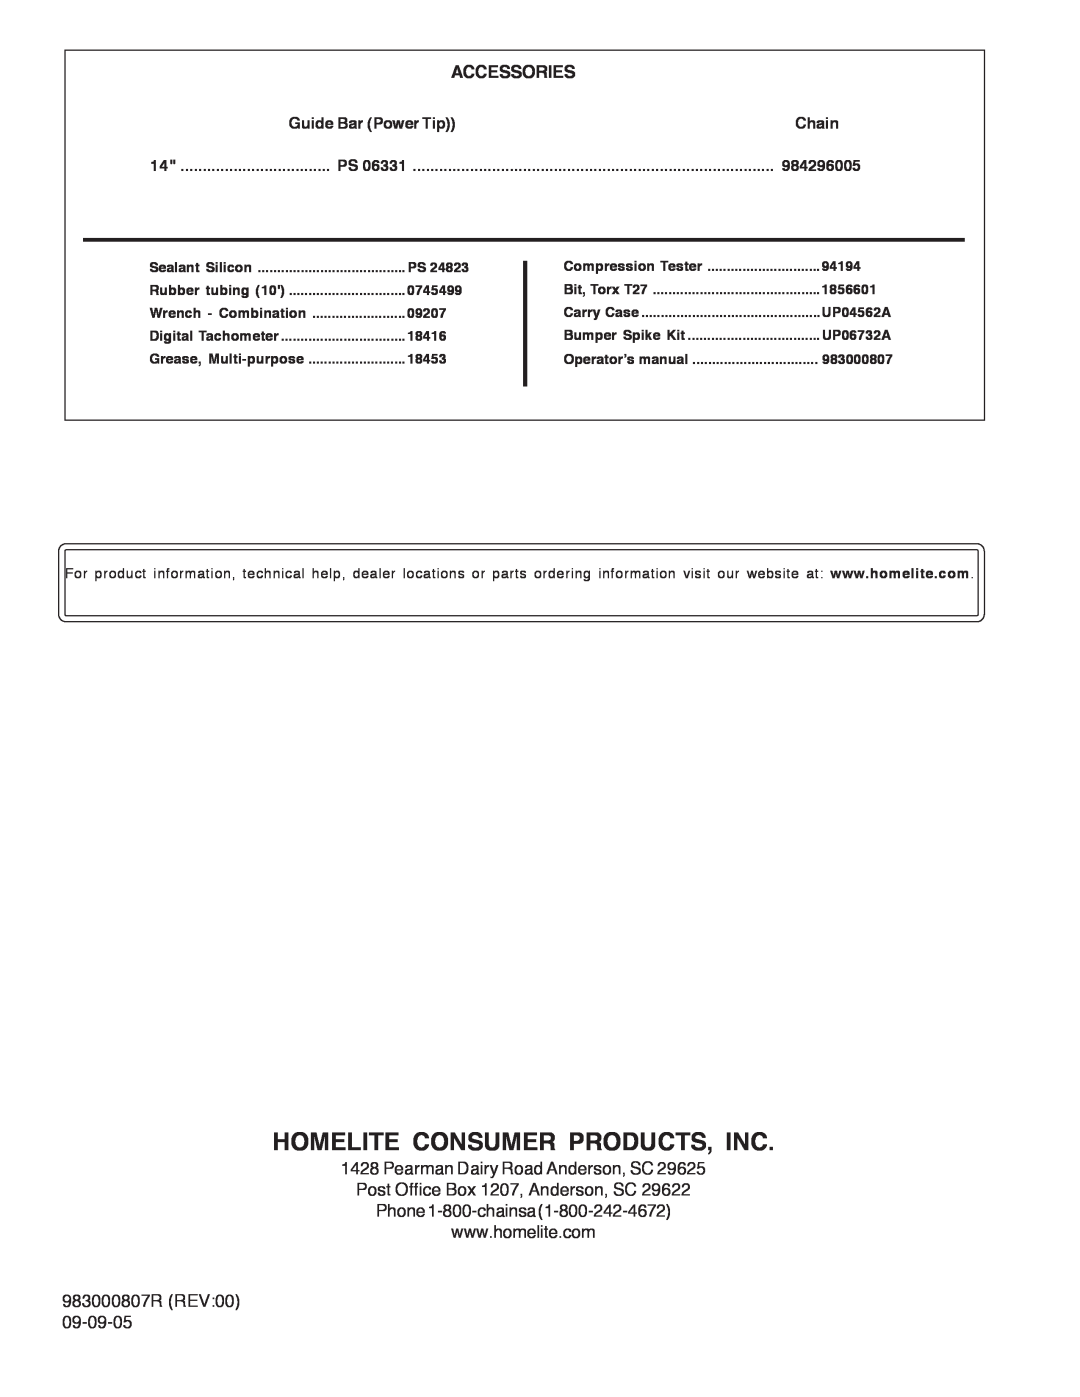 Homelite UT10901B Homelite Consumer Products, Inc, Accessories, 0745499, 09207, 18416, 18453, 94194, 1856601, UP04562A 